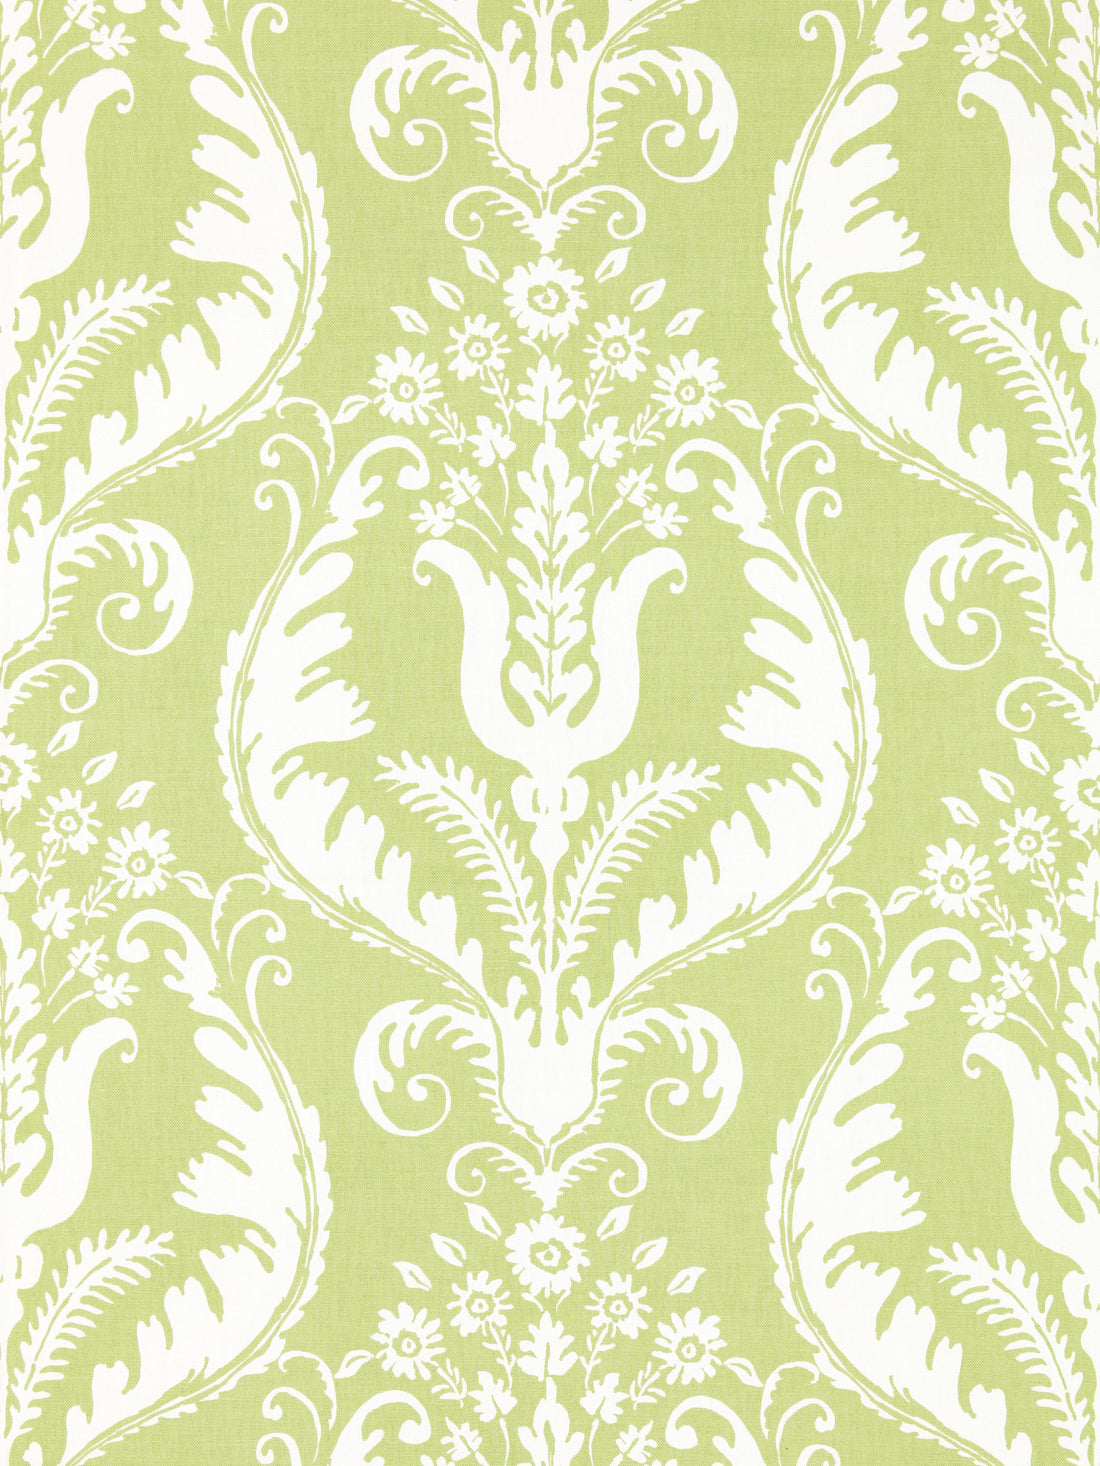 Primavera Linen Print fabric in celery color - pattern number SC 000216597 - by Scalamandre in the Scalamandre Fabrics Book 1 collection